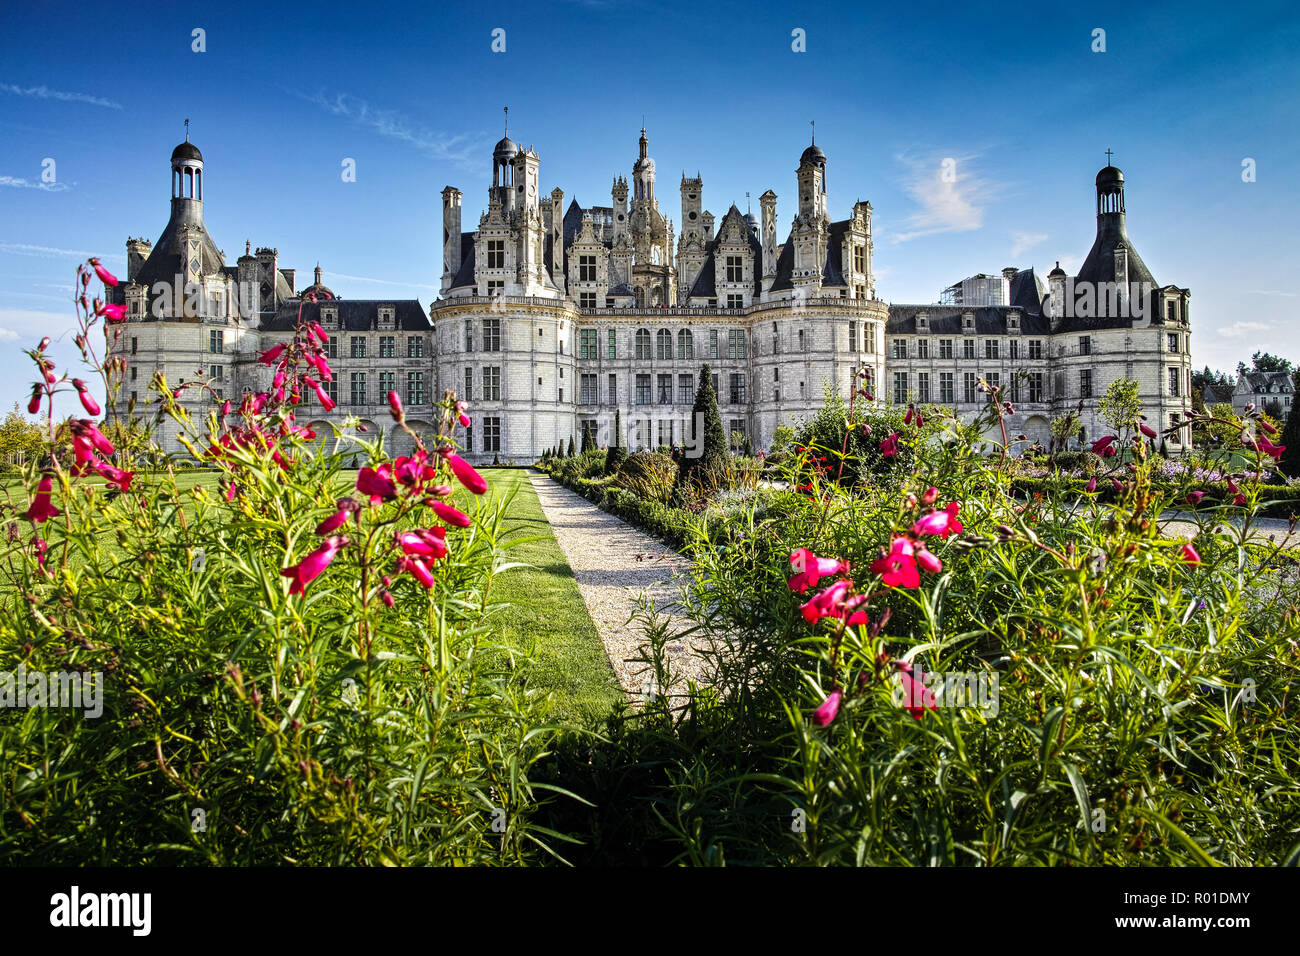 Chateau de Chambord, panoramic view of the Northwest facade of the largest royal Renaissance french castle in Loire Valley, France Stock Photo